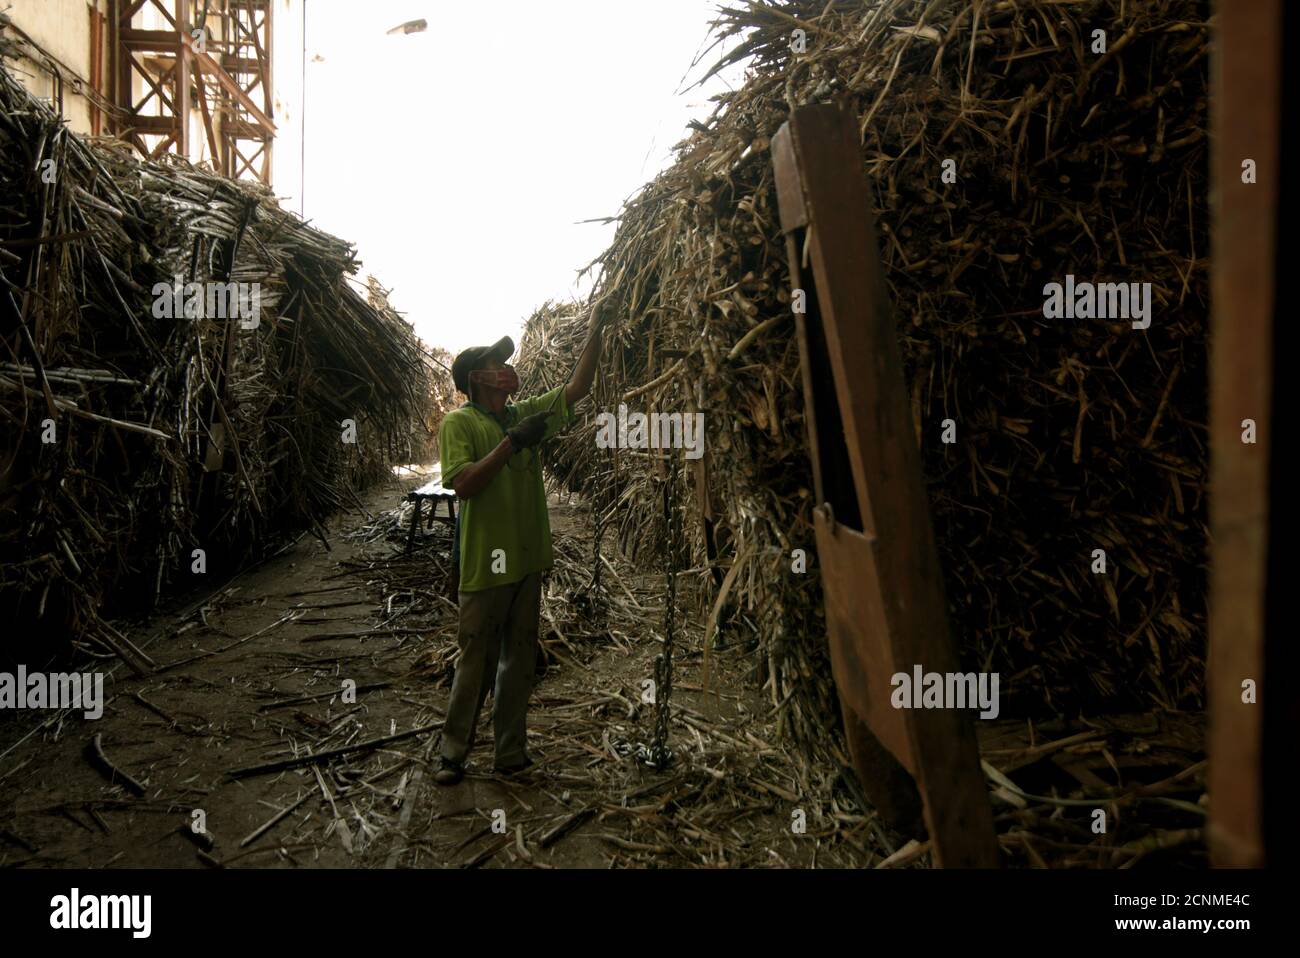 Workers checking, sorting and cleaning sugarcane supplies before the processing phases at Tasikmadu Sugar Mill in Karanganyar, Central Java, Indonesia Stock Photo